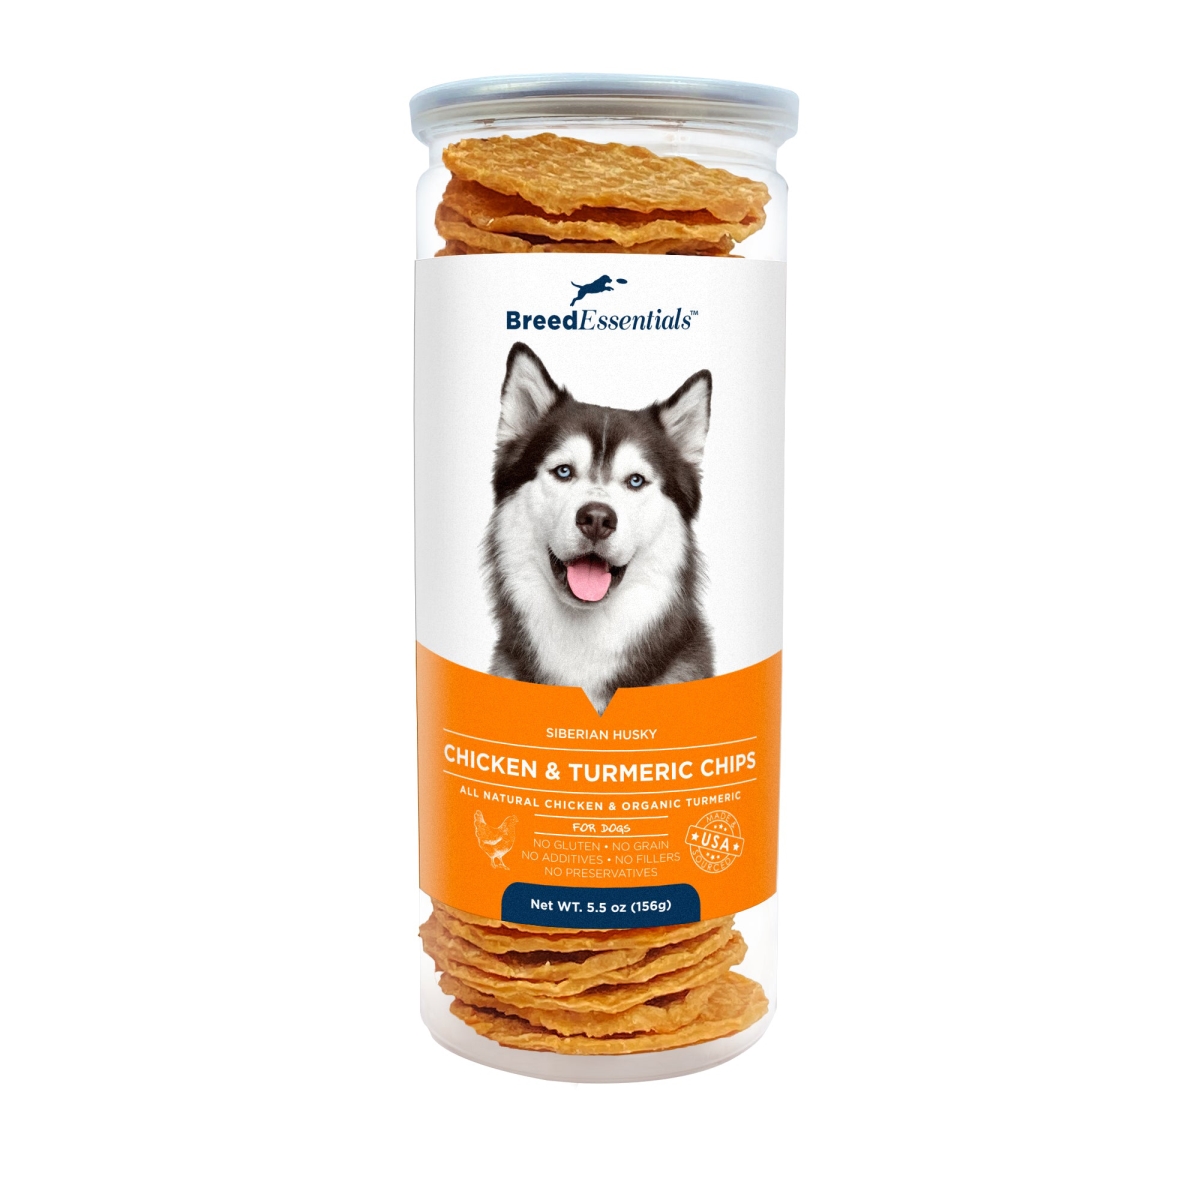 Picture of Breed Essentials 197247000648 5.5 oz Chicken & Turmeric Chips - Siberian Husky